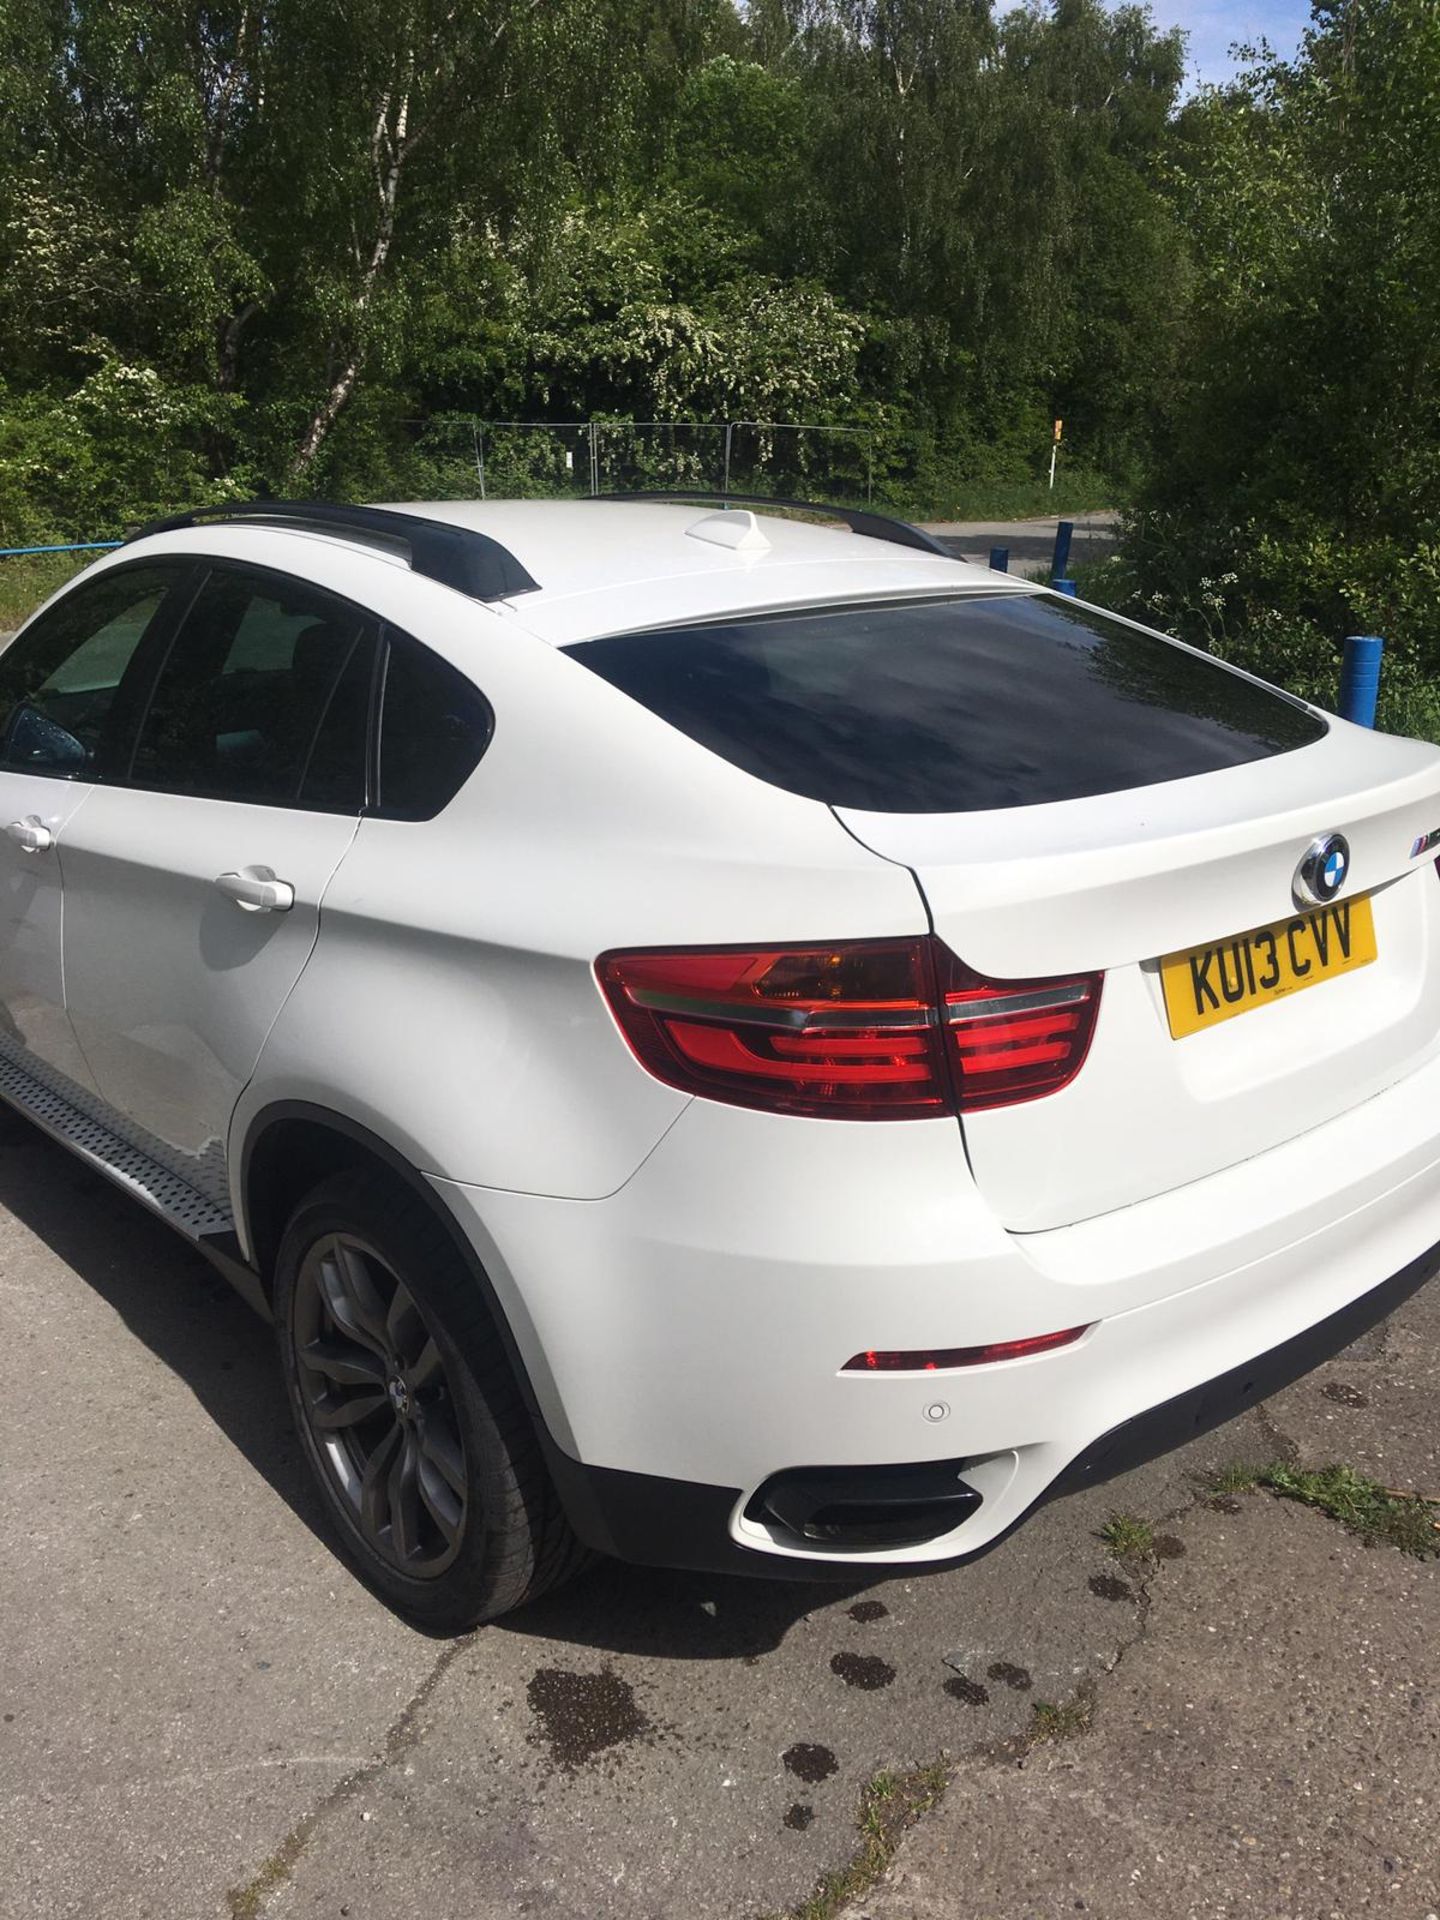 2013/13 REG BMW X6 M50D AUTOMATIC 3.0 DIESEL WHITE, SHOWING 1 FORMER KEEPER *NO VAT* - Image 5 of 41